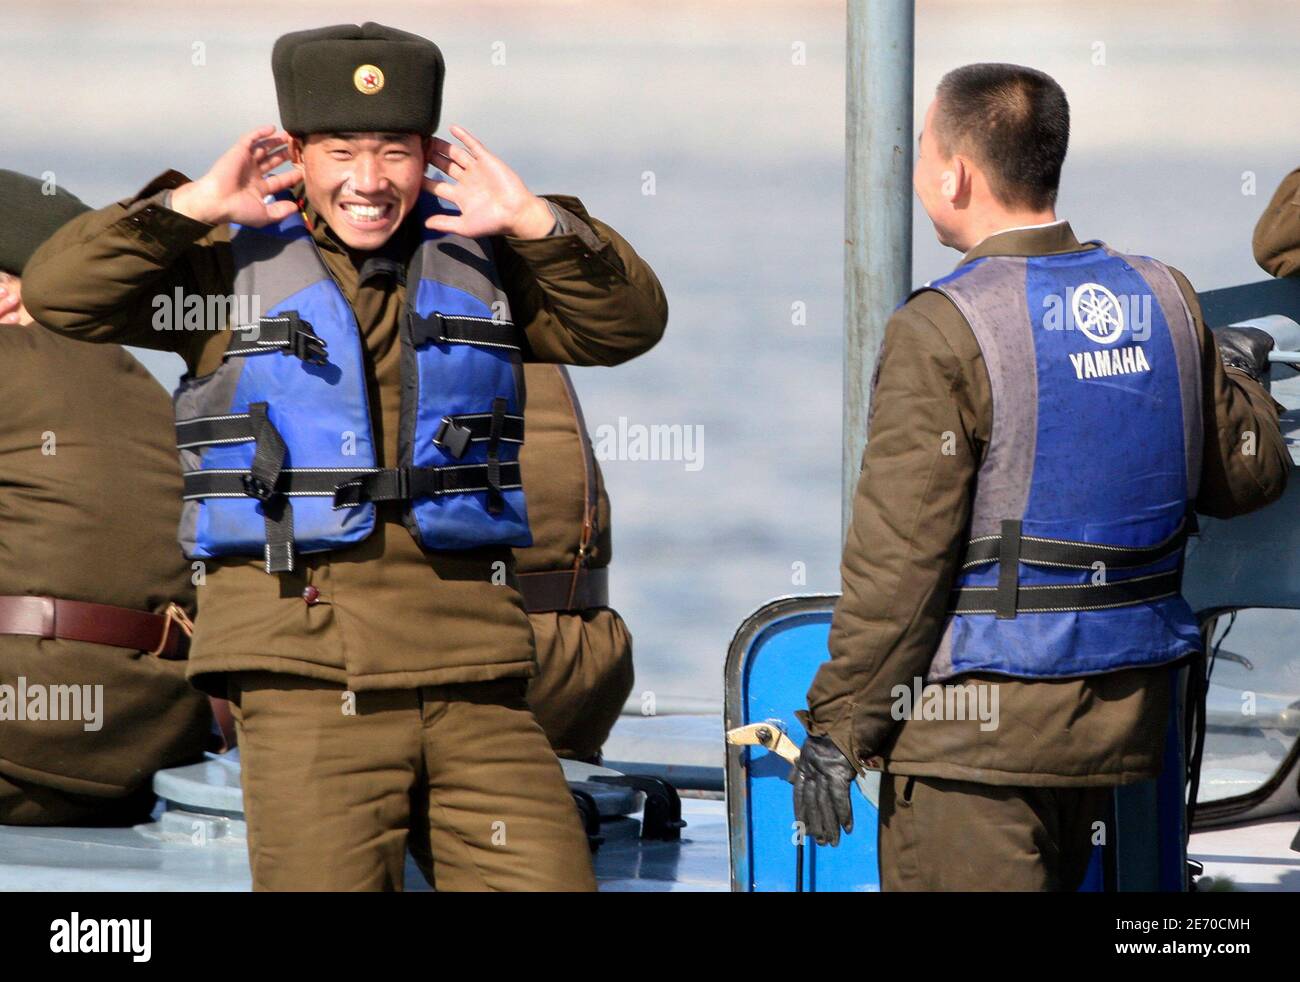 A North Korean soldier reacts while patrolling on a military boat on the Yalu River near the North Korean town of Sinuiju, opposite the Chinese border city of Dandong, March 27, 2010. South Korea's president ordered an investigation on Saturday into the cause of the sinking of a navy ship near the disputed North Korea border but officials said it was unlikely to have been the result of an attack by Pyongyang. REUTERS/Jacky Chen (NORTH KOREA - Tags: POLITICS MILITARY) Stock Photo